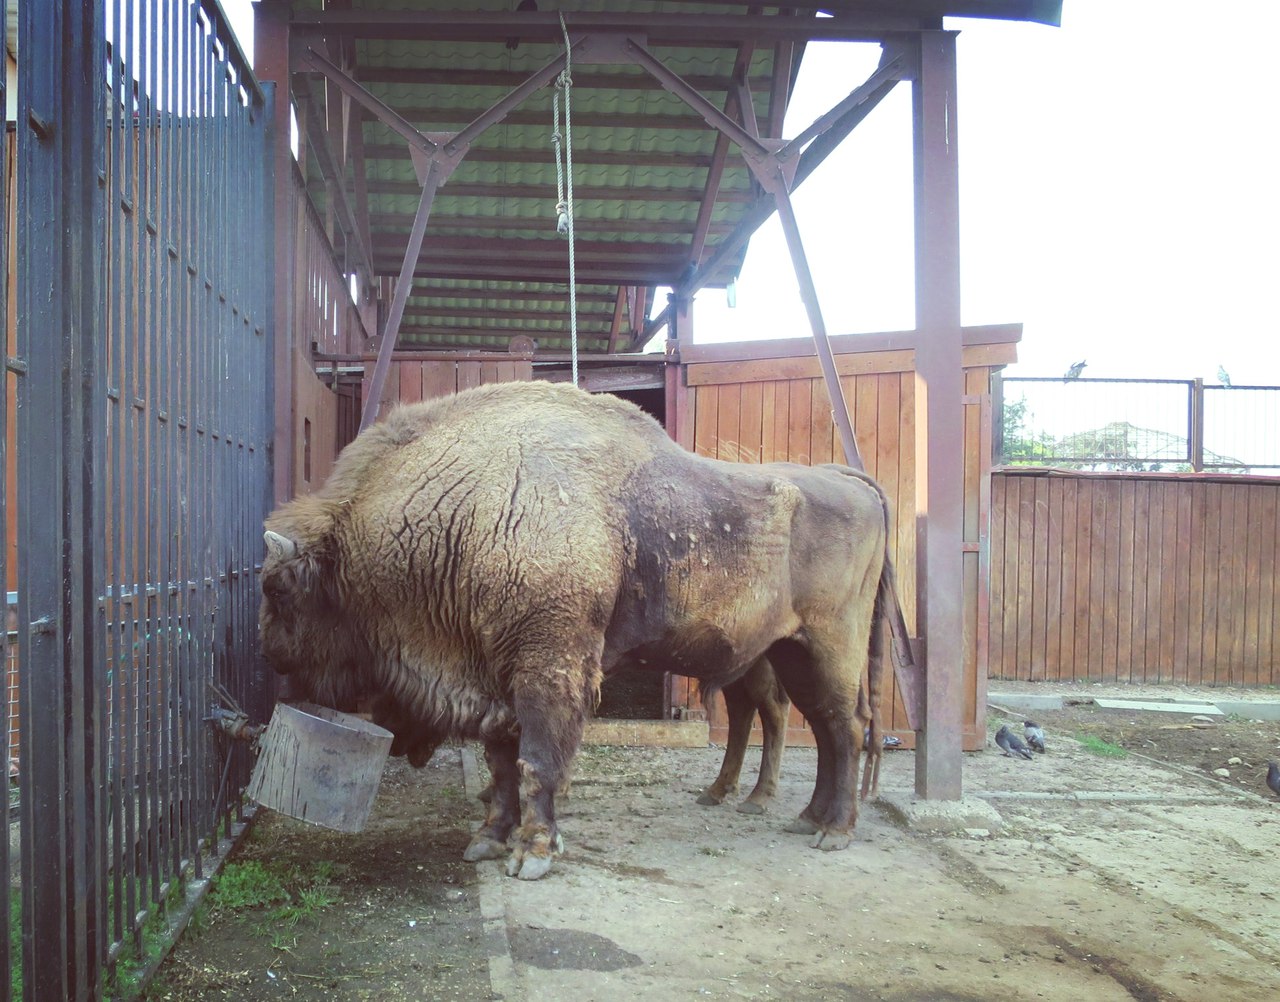 A male bison at the Minsk Zoo. Autumn 2016 Photo by A.Basak